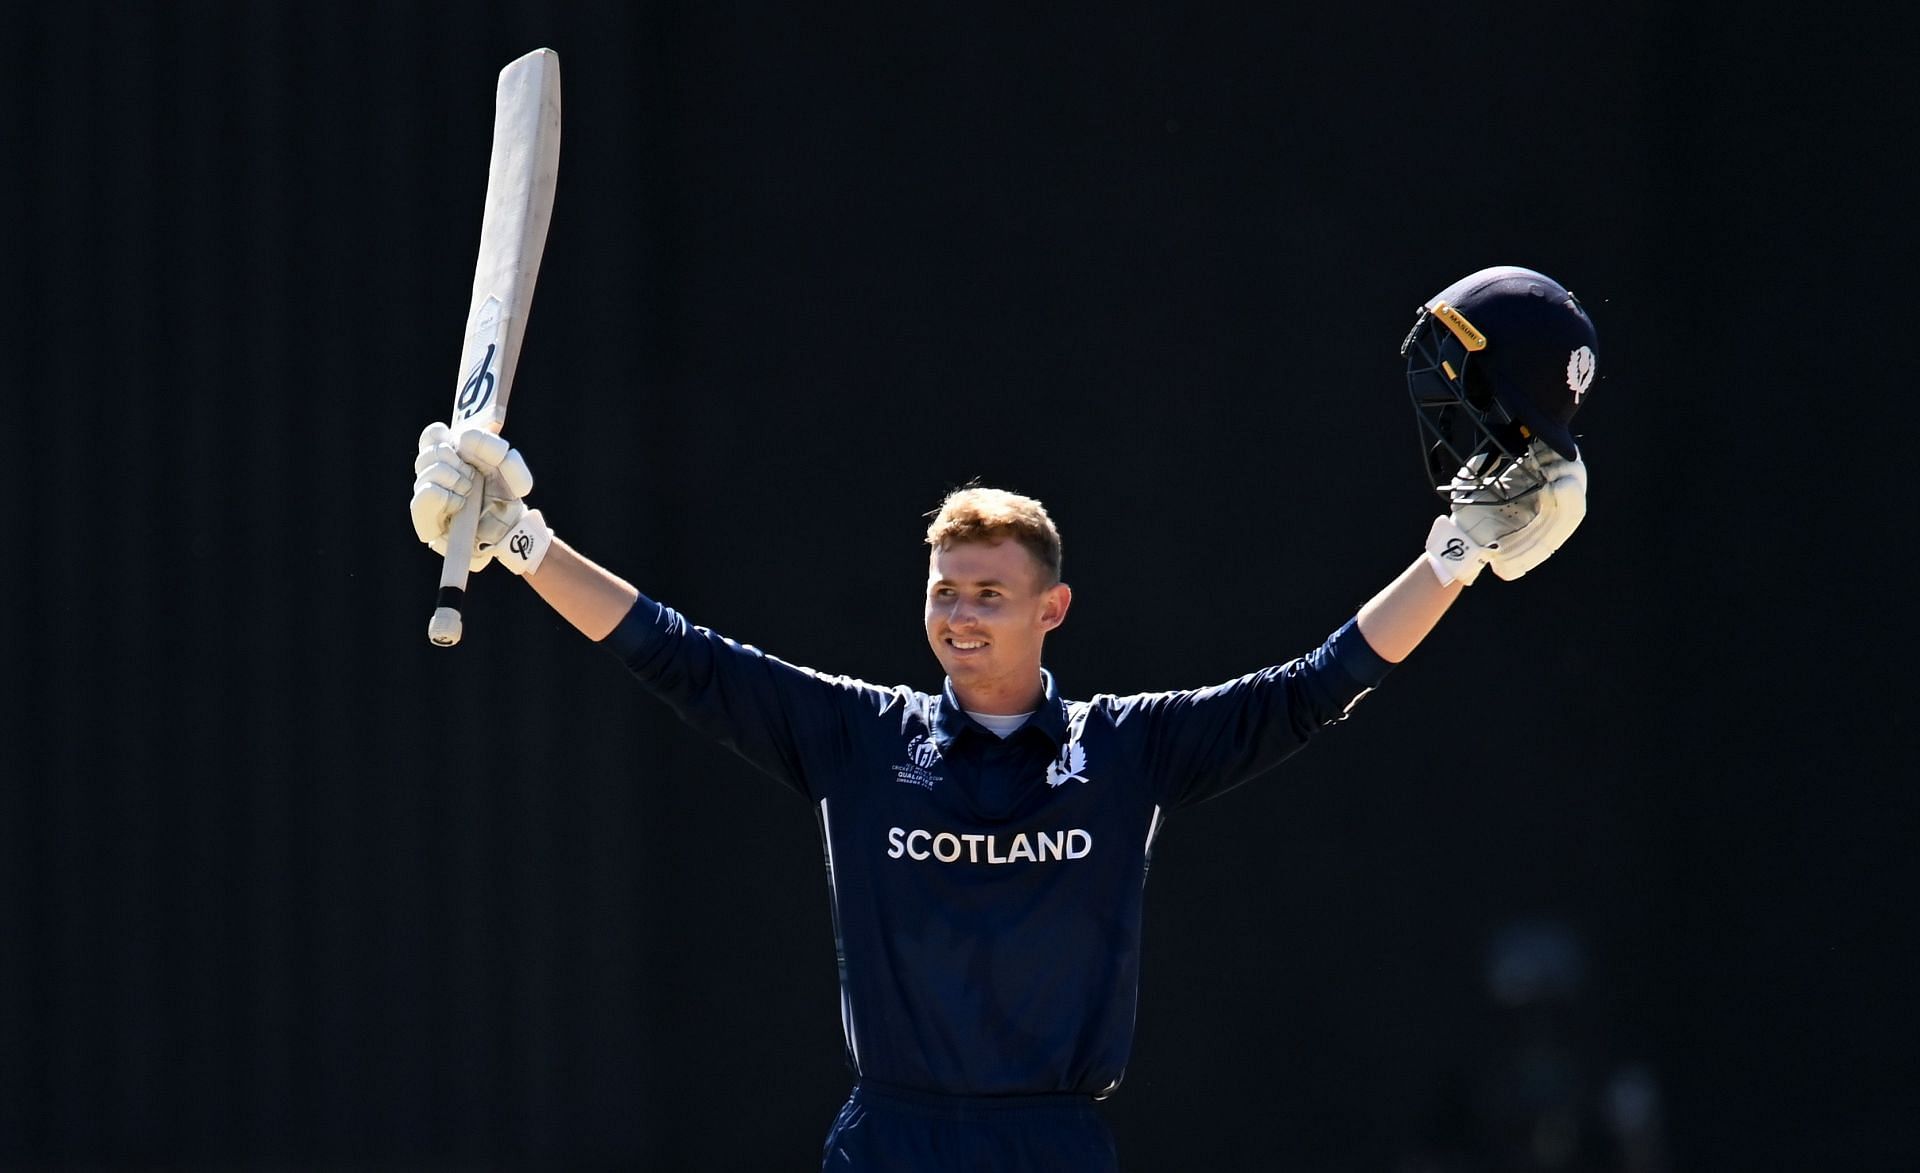 Scotland vs Oman, One-off T20I: Probable XIs, Match Prediction, Pitch Report, Weather Forecast, and Live Streaming Details